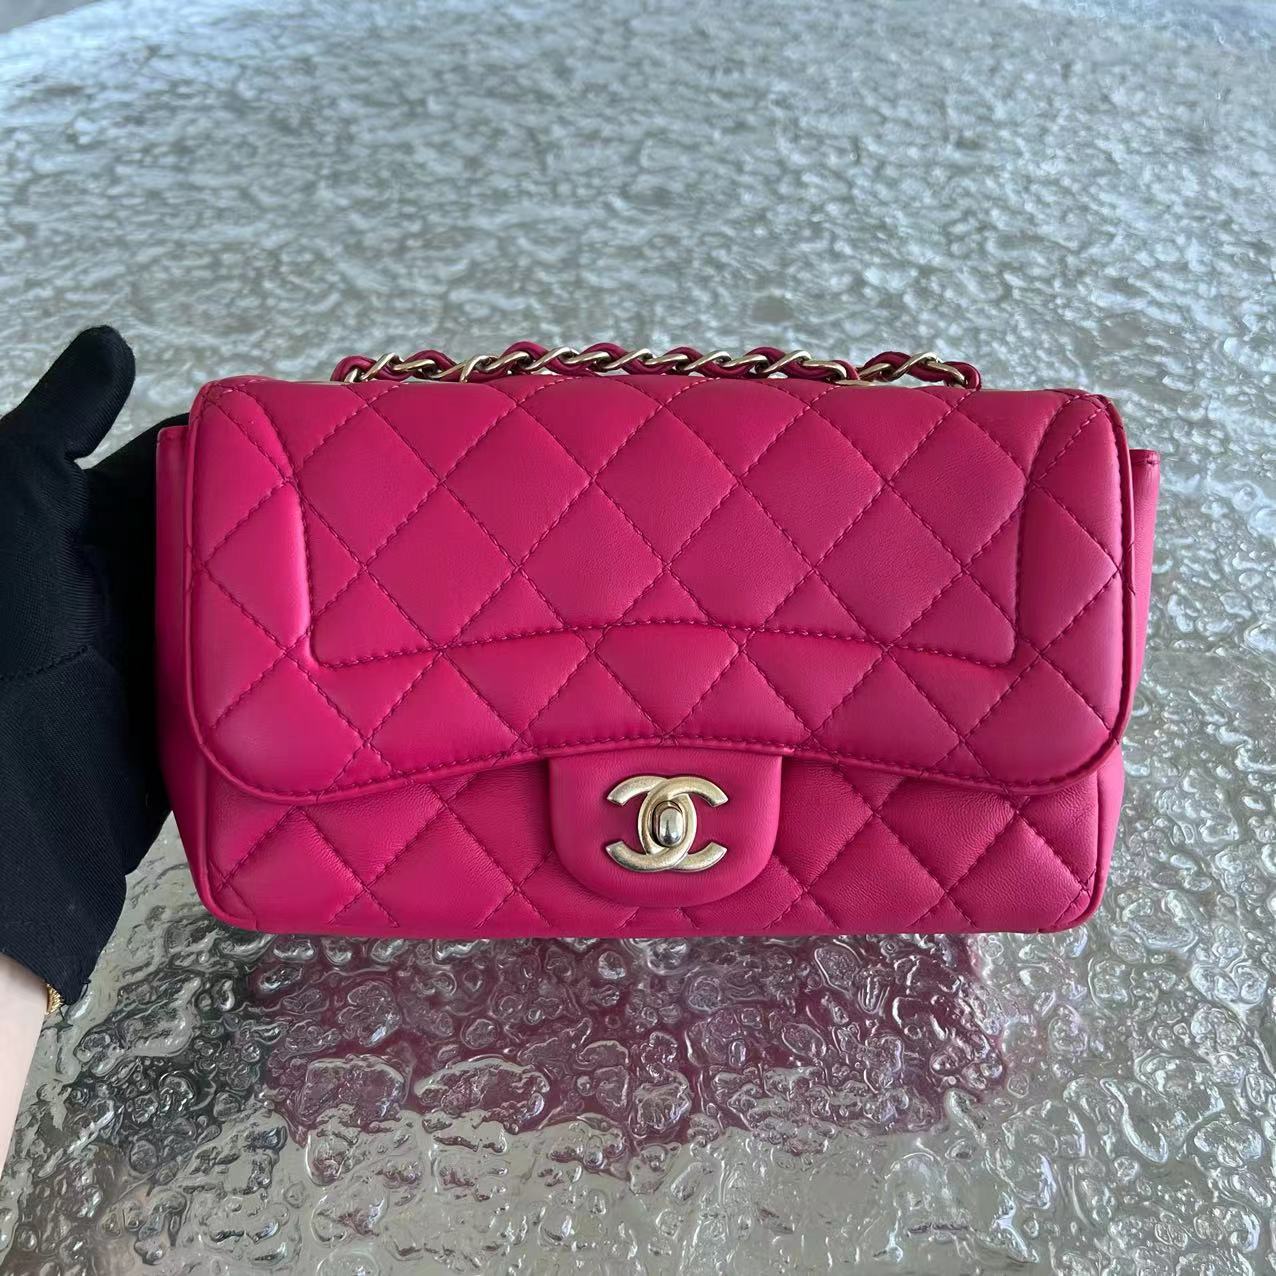 Chanel Mademoiselle Chic Seasonal Flap Mini Quilted Lambskin Hot Pink GHW No 21